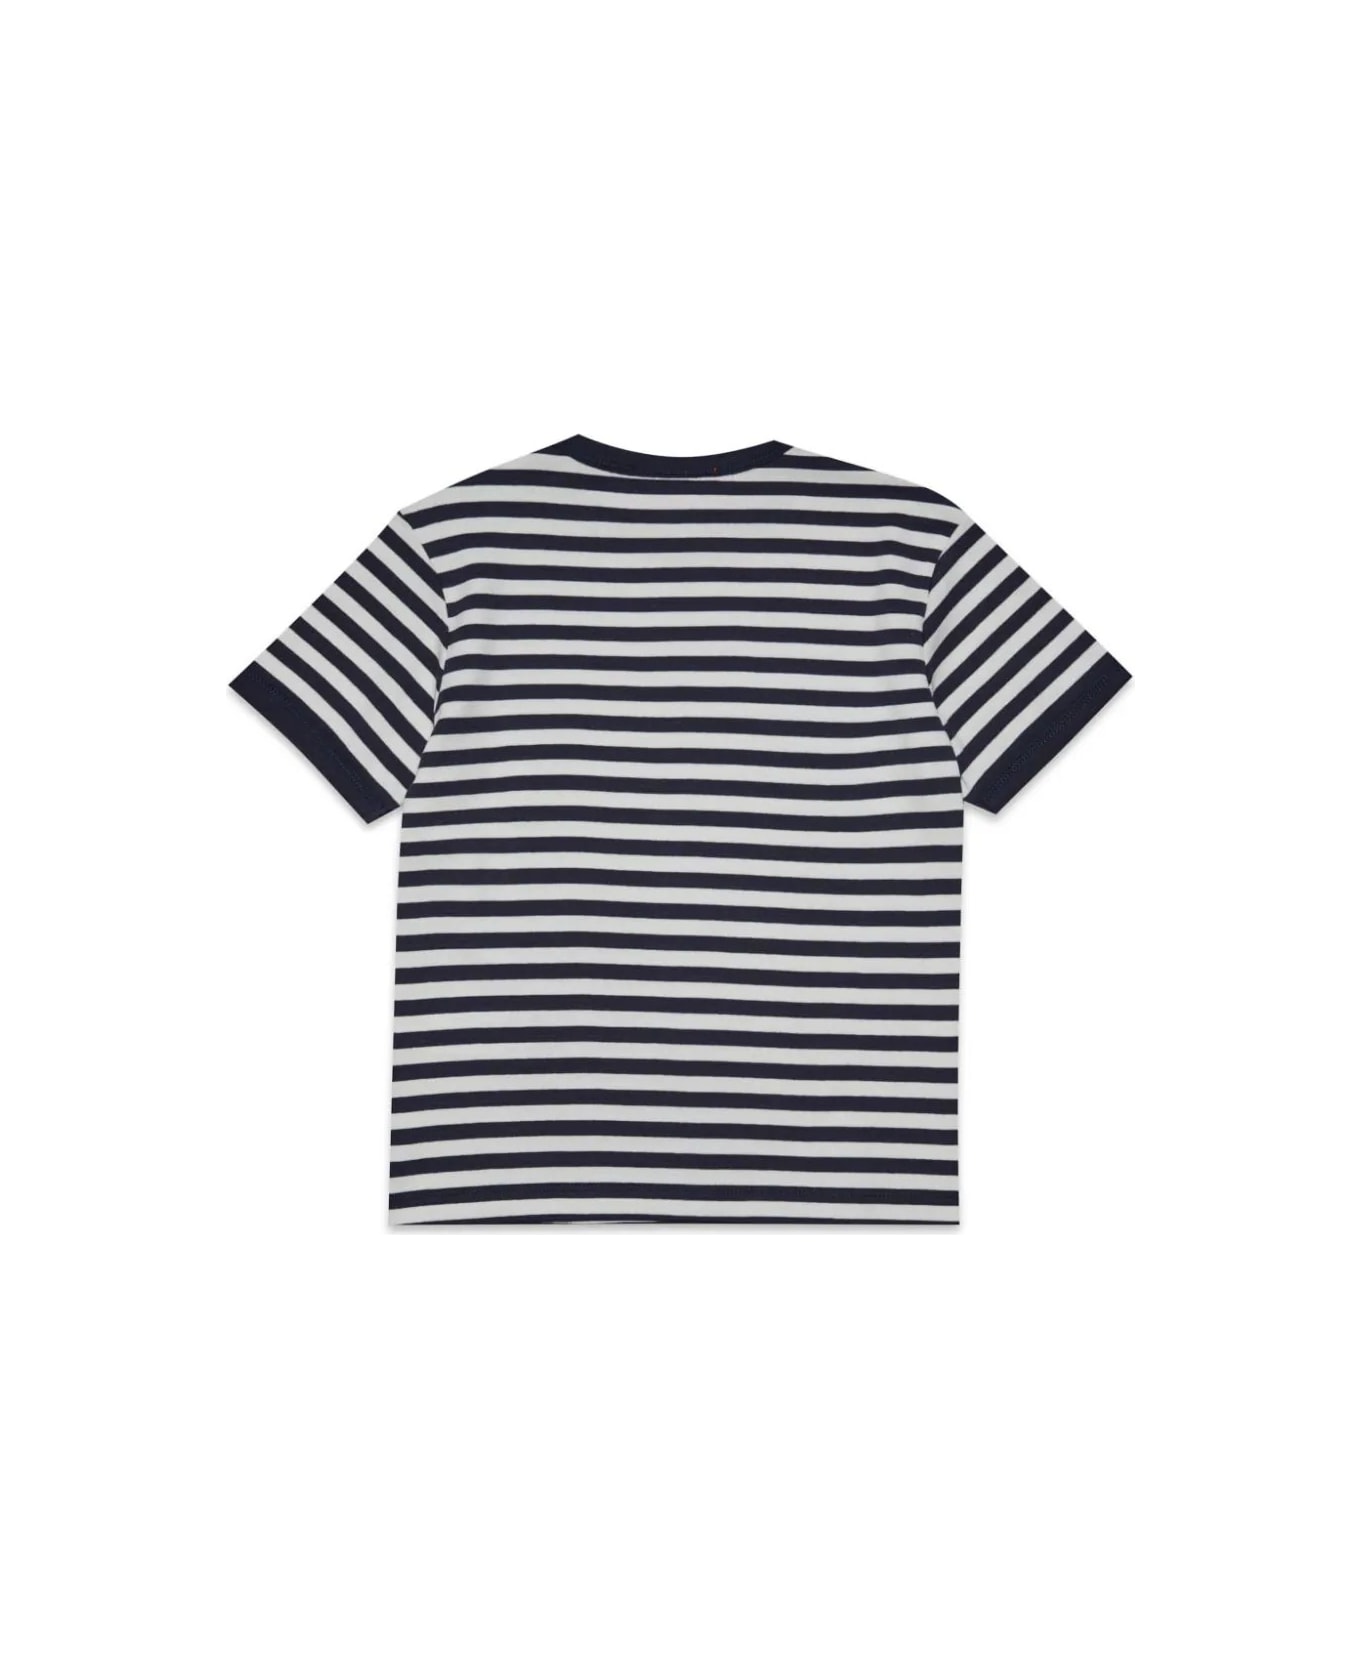 Max&Co. White And Blue Striped T-shirt With Logo - Blue